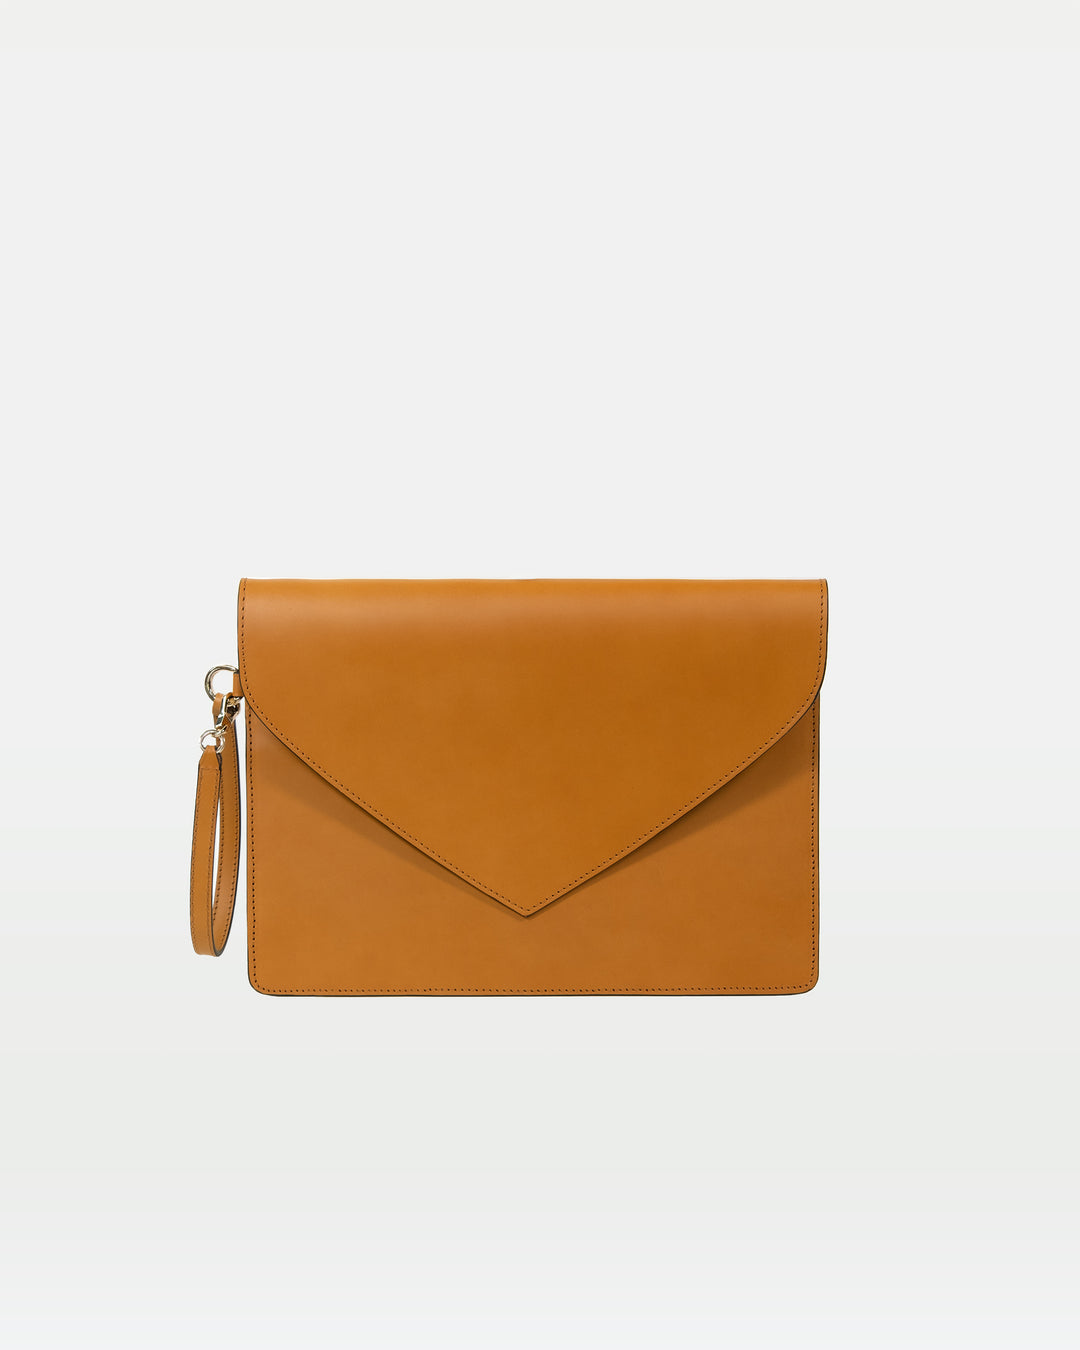 MODHER Envelope Clutch in Yellow malto vegetable tanned leather#color_yellow-malto